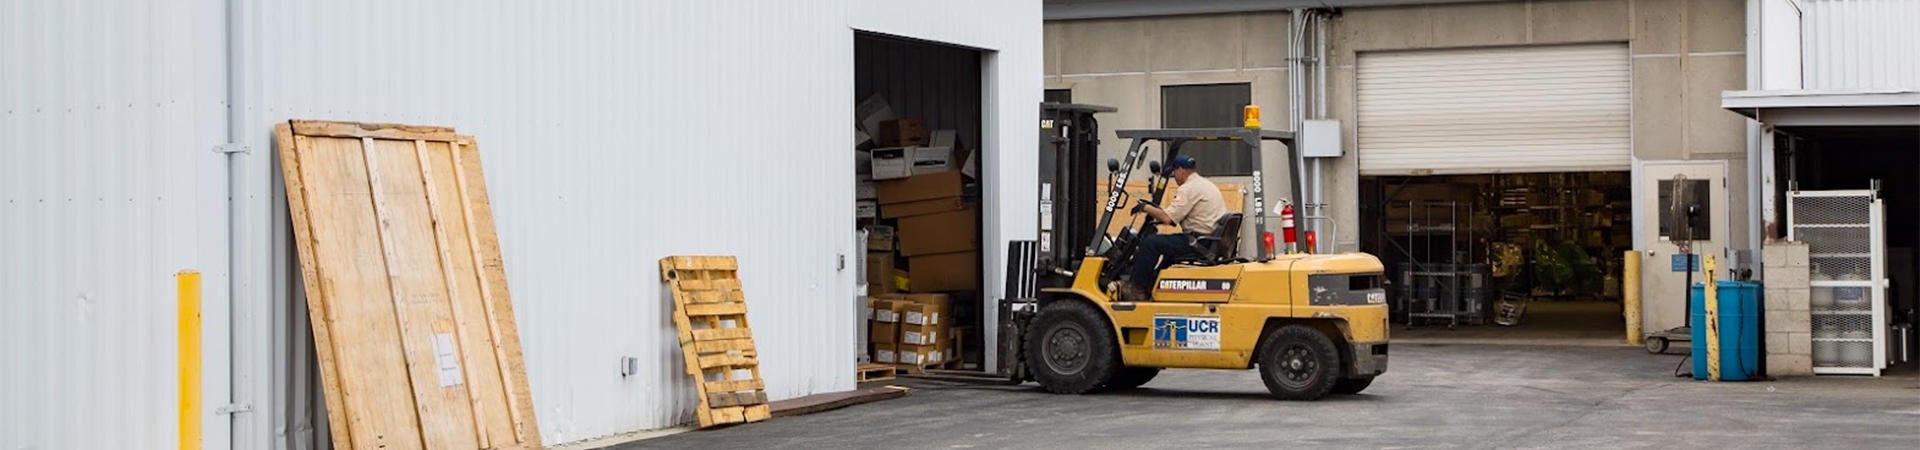 Forklift at UCR Receiving Services